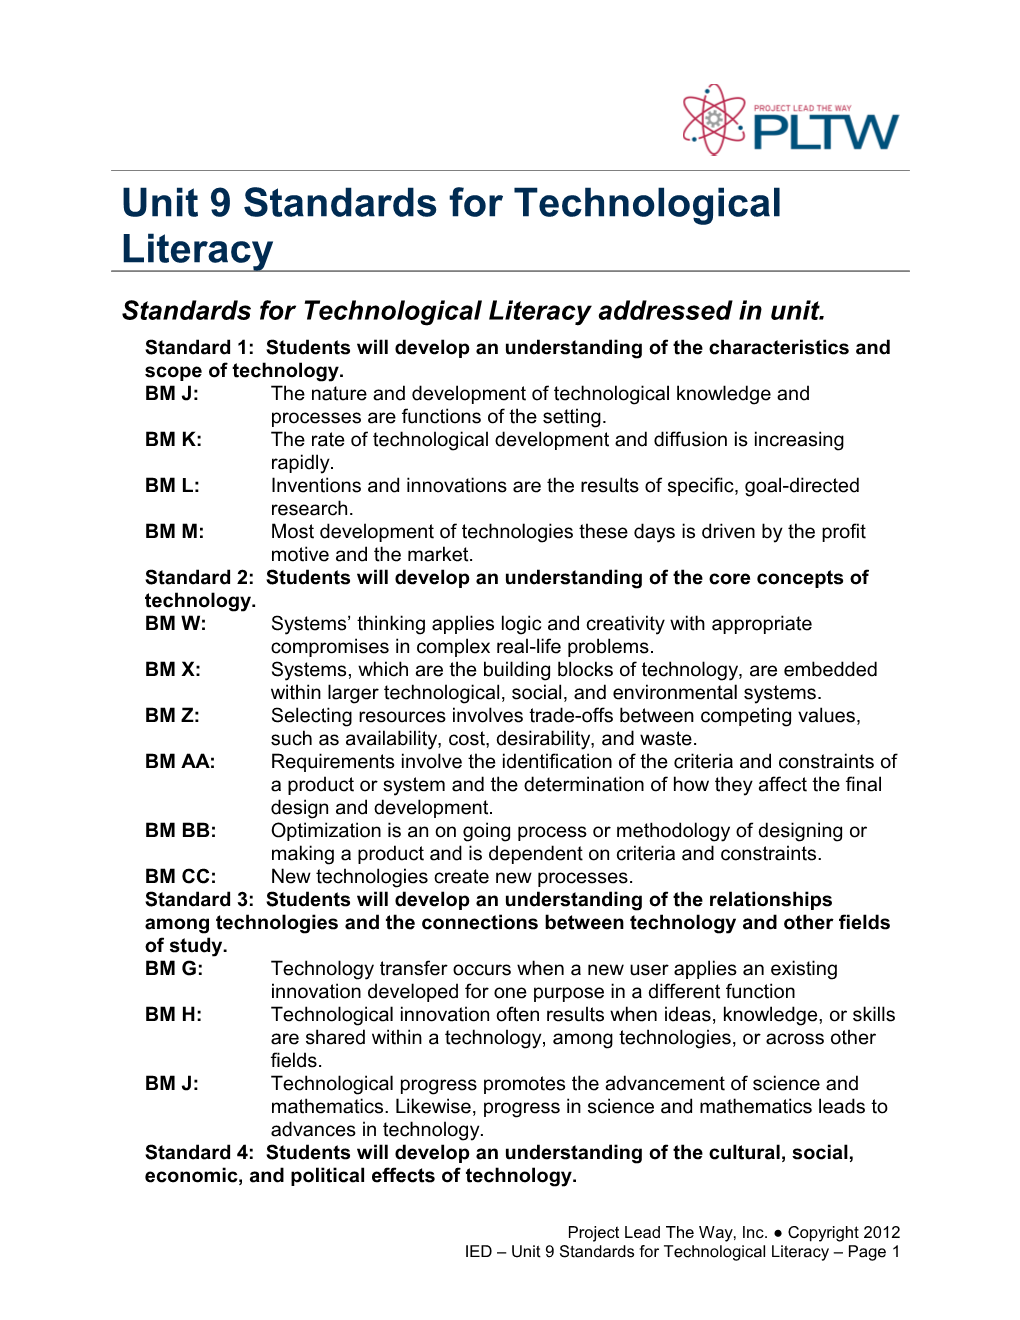 Unit 9 Standards for Technological Literacy